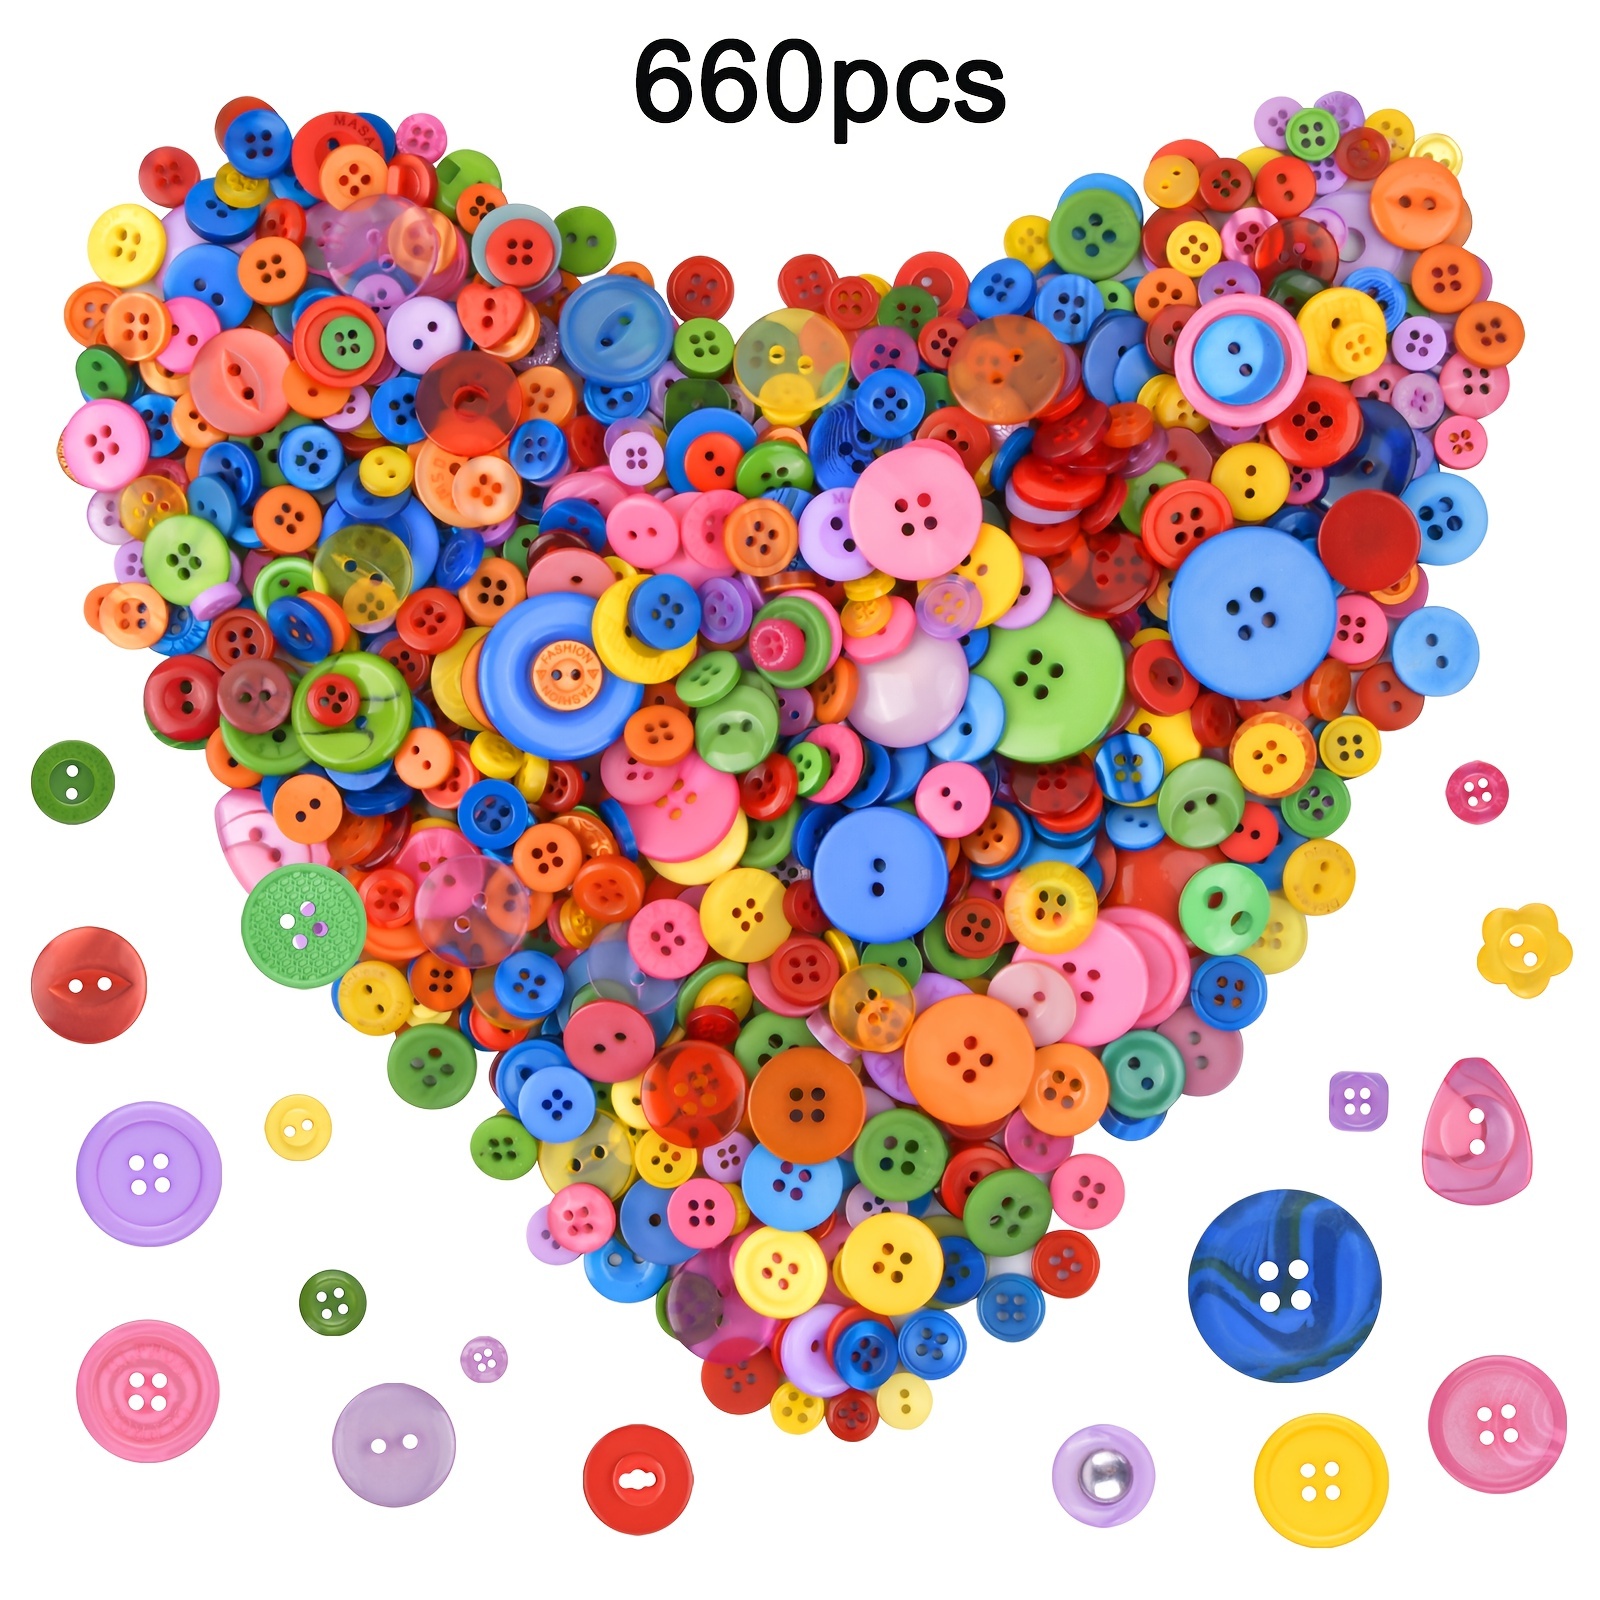 ilauke 1200 pcs Colorful Buttons, Mixed Colors Resin Craft Buttons